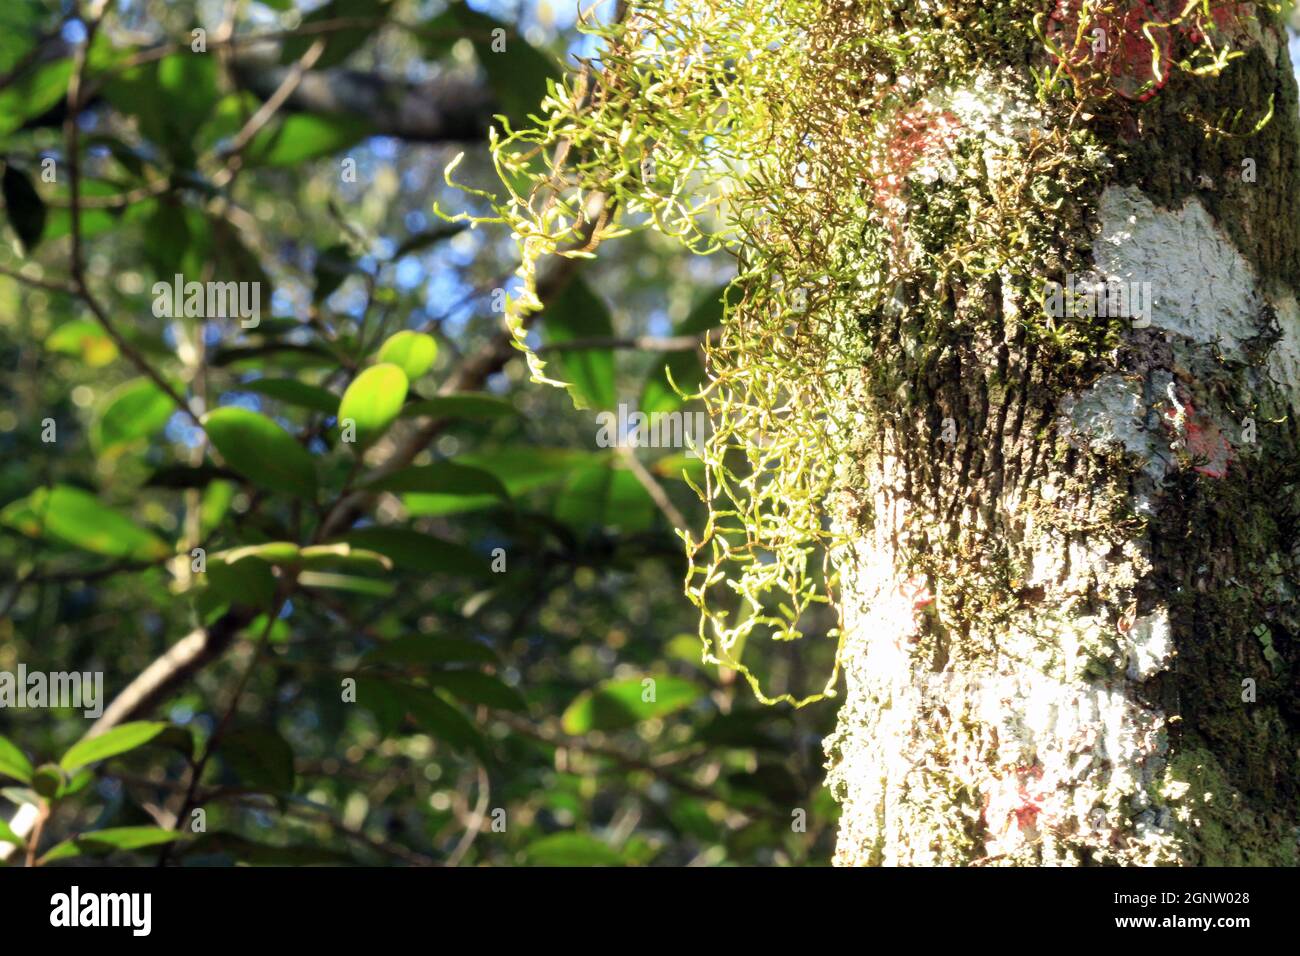 Sprout of trees and other terrestrial epiphytes known as aerial plants. Stock Photo